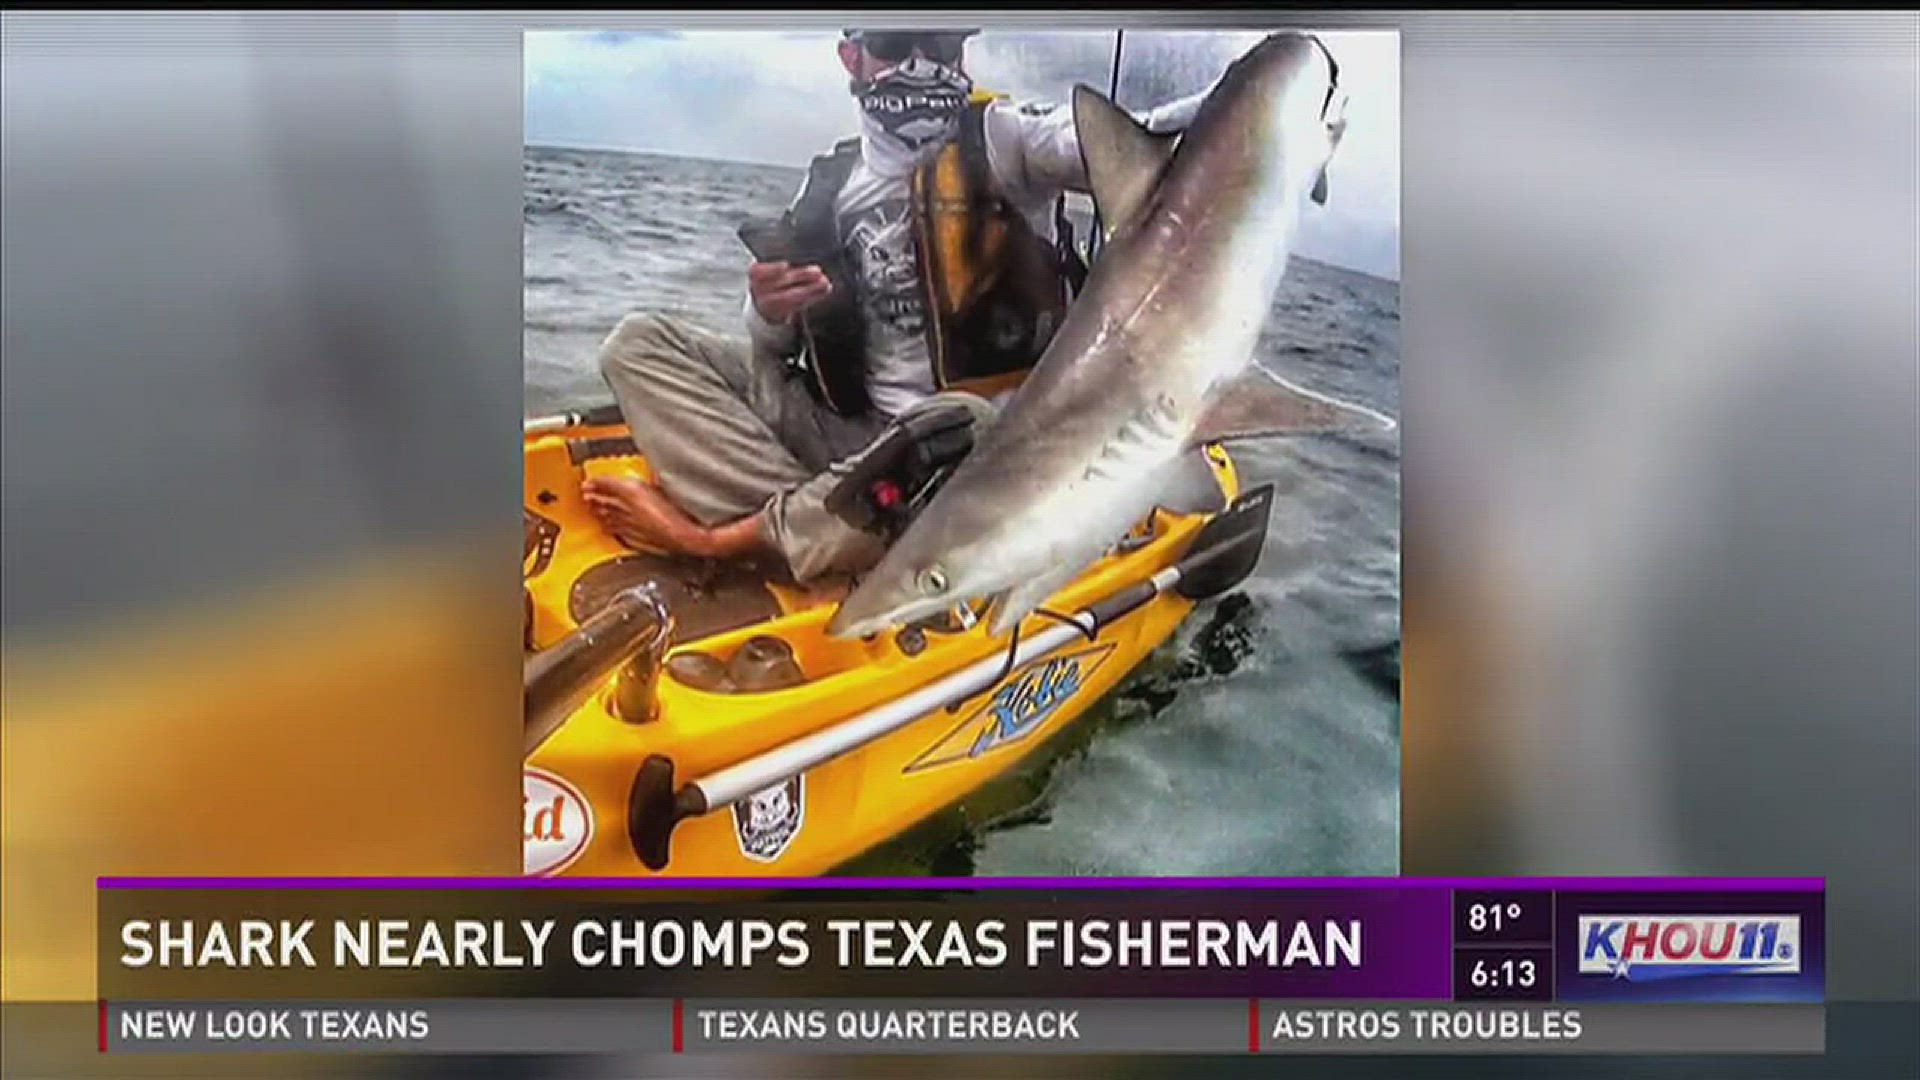 A North Texas fisherman was in for quite a surprise when he hooked a shark while fishing in his kayak near Corpus Christi.